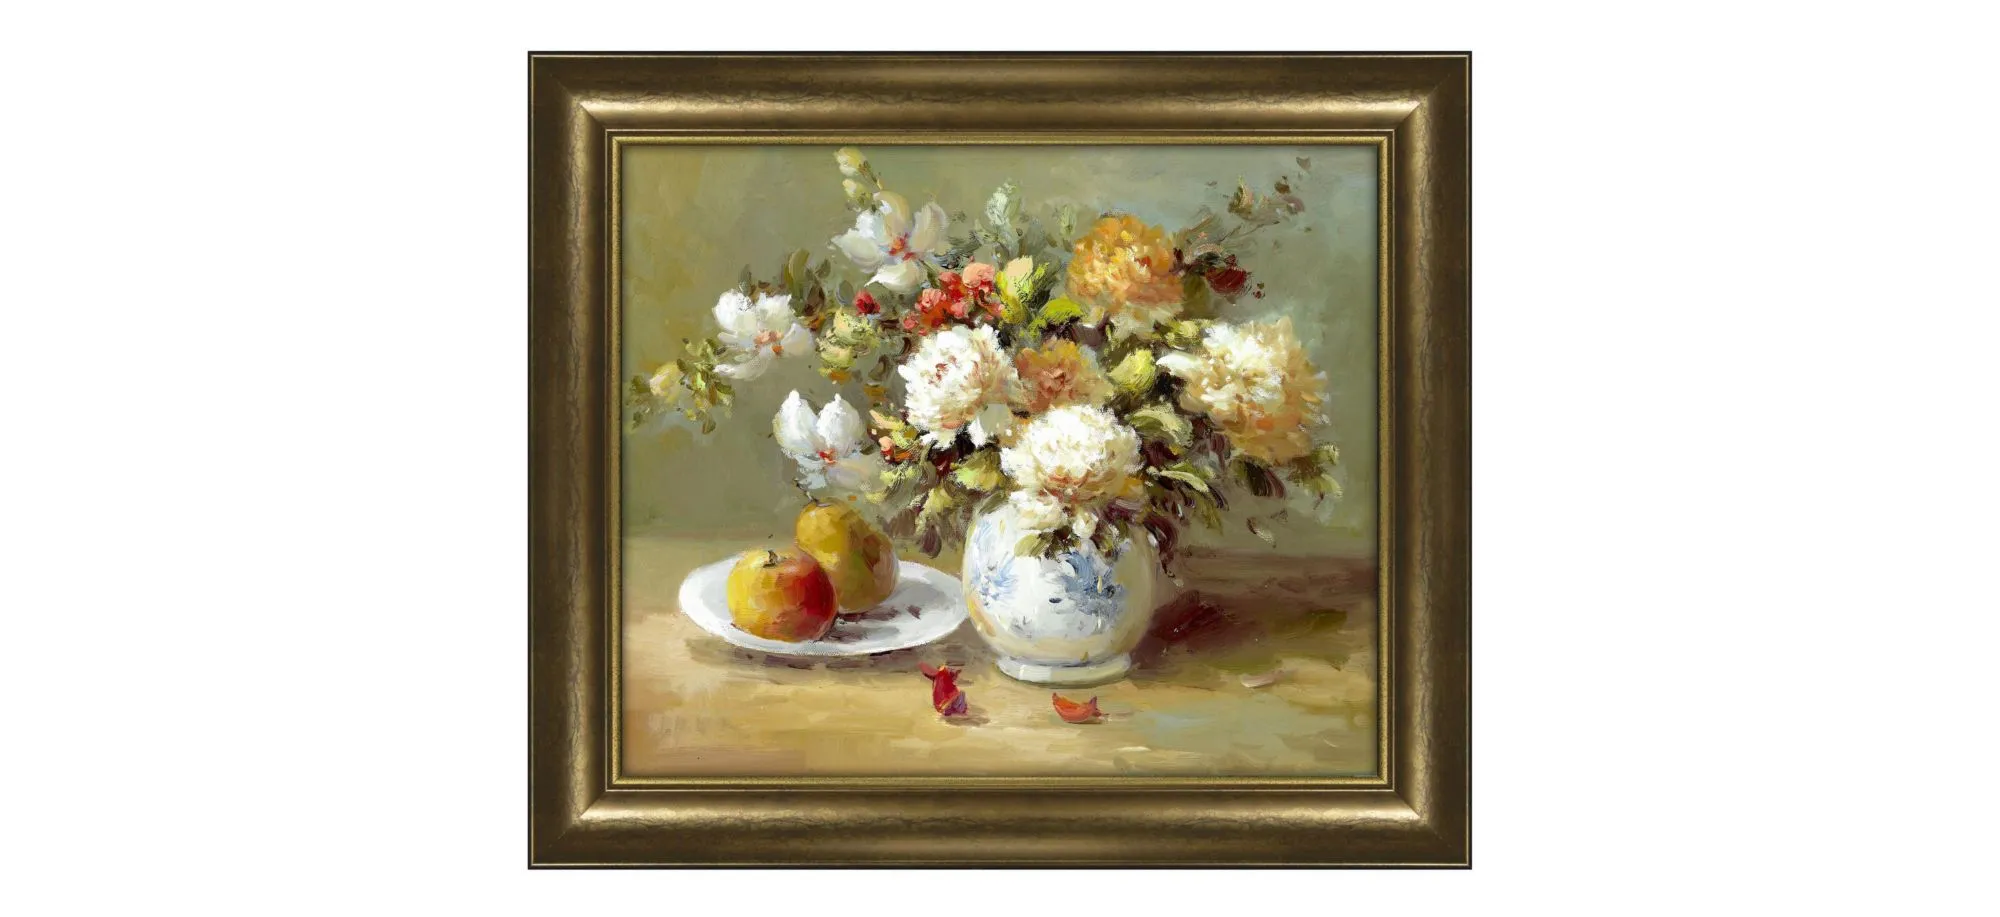 Flowers and Fruits Framed Canvas Wall Art in Multicolor by Prestige Arts /Ati Indust